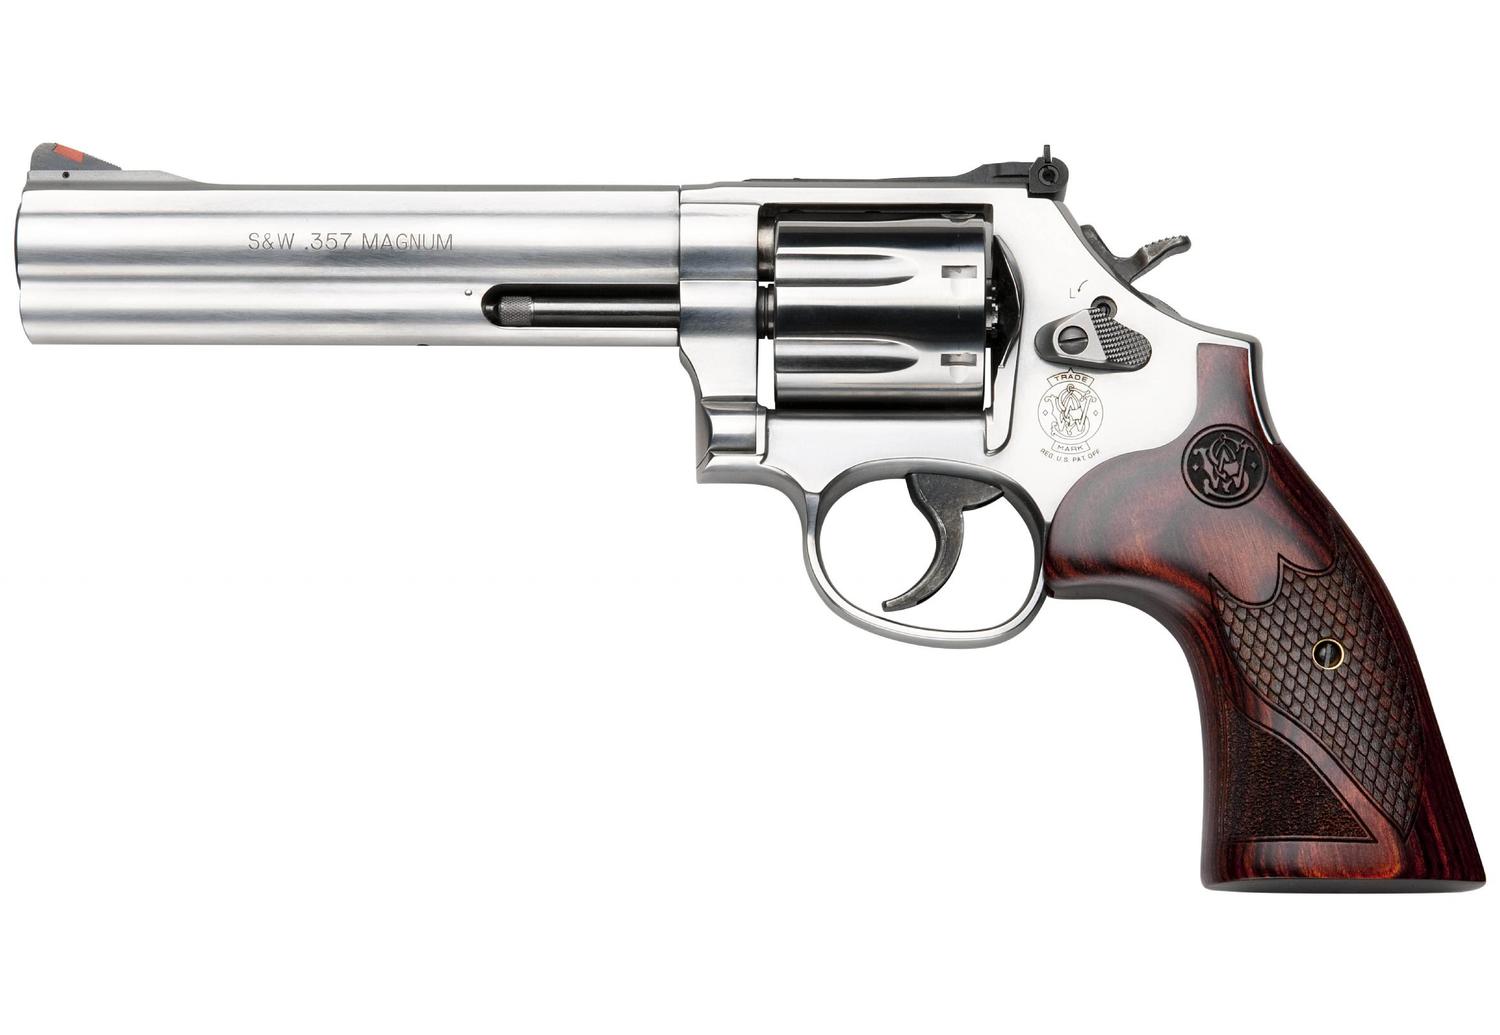  Model 686 Plus Deluxe .357mag 7rd 6in - Satin Stainless